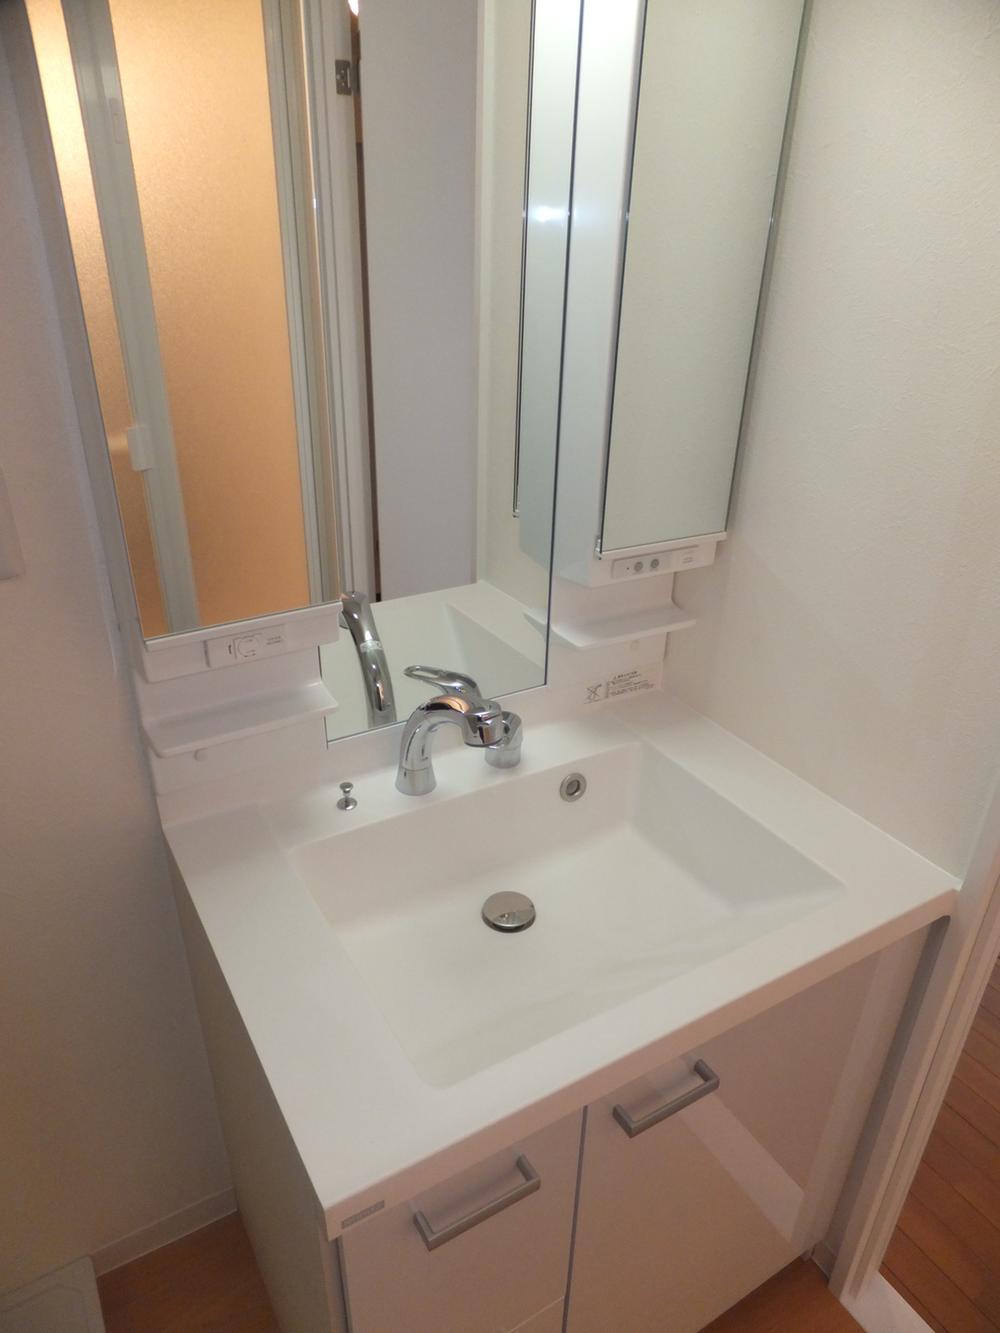 Wash basin, toilet. Vanity was new exchange. Because the shower faucet, This is useful for busy morning.